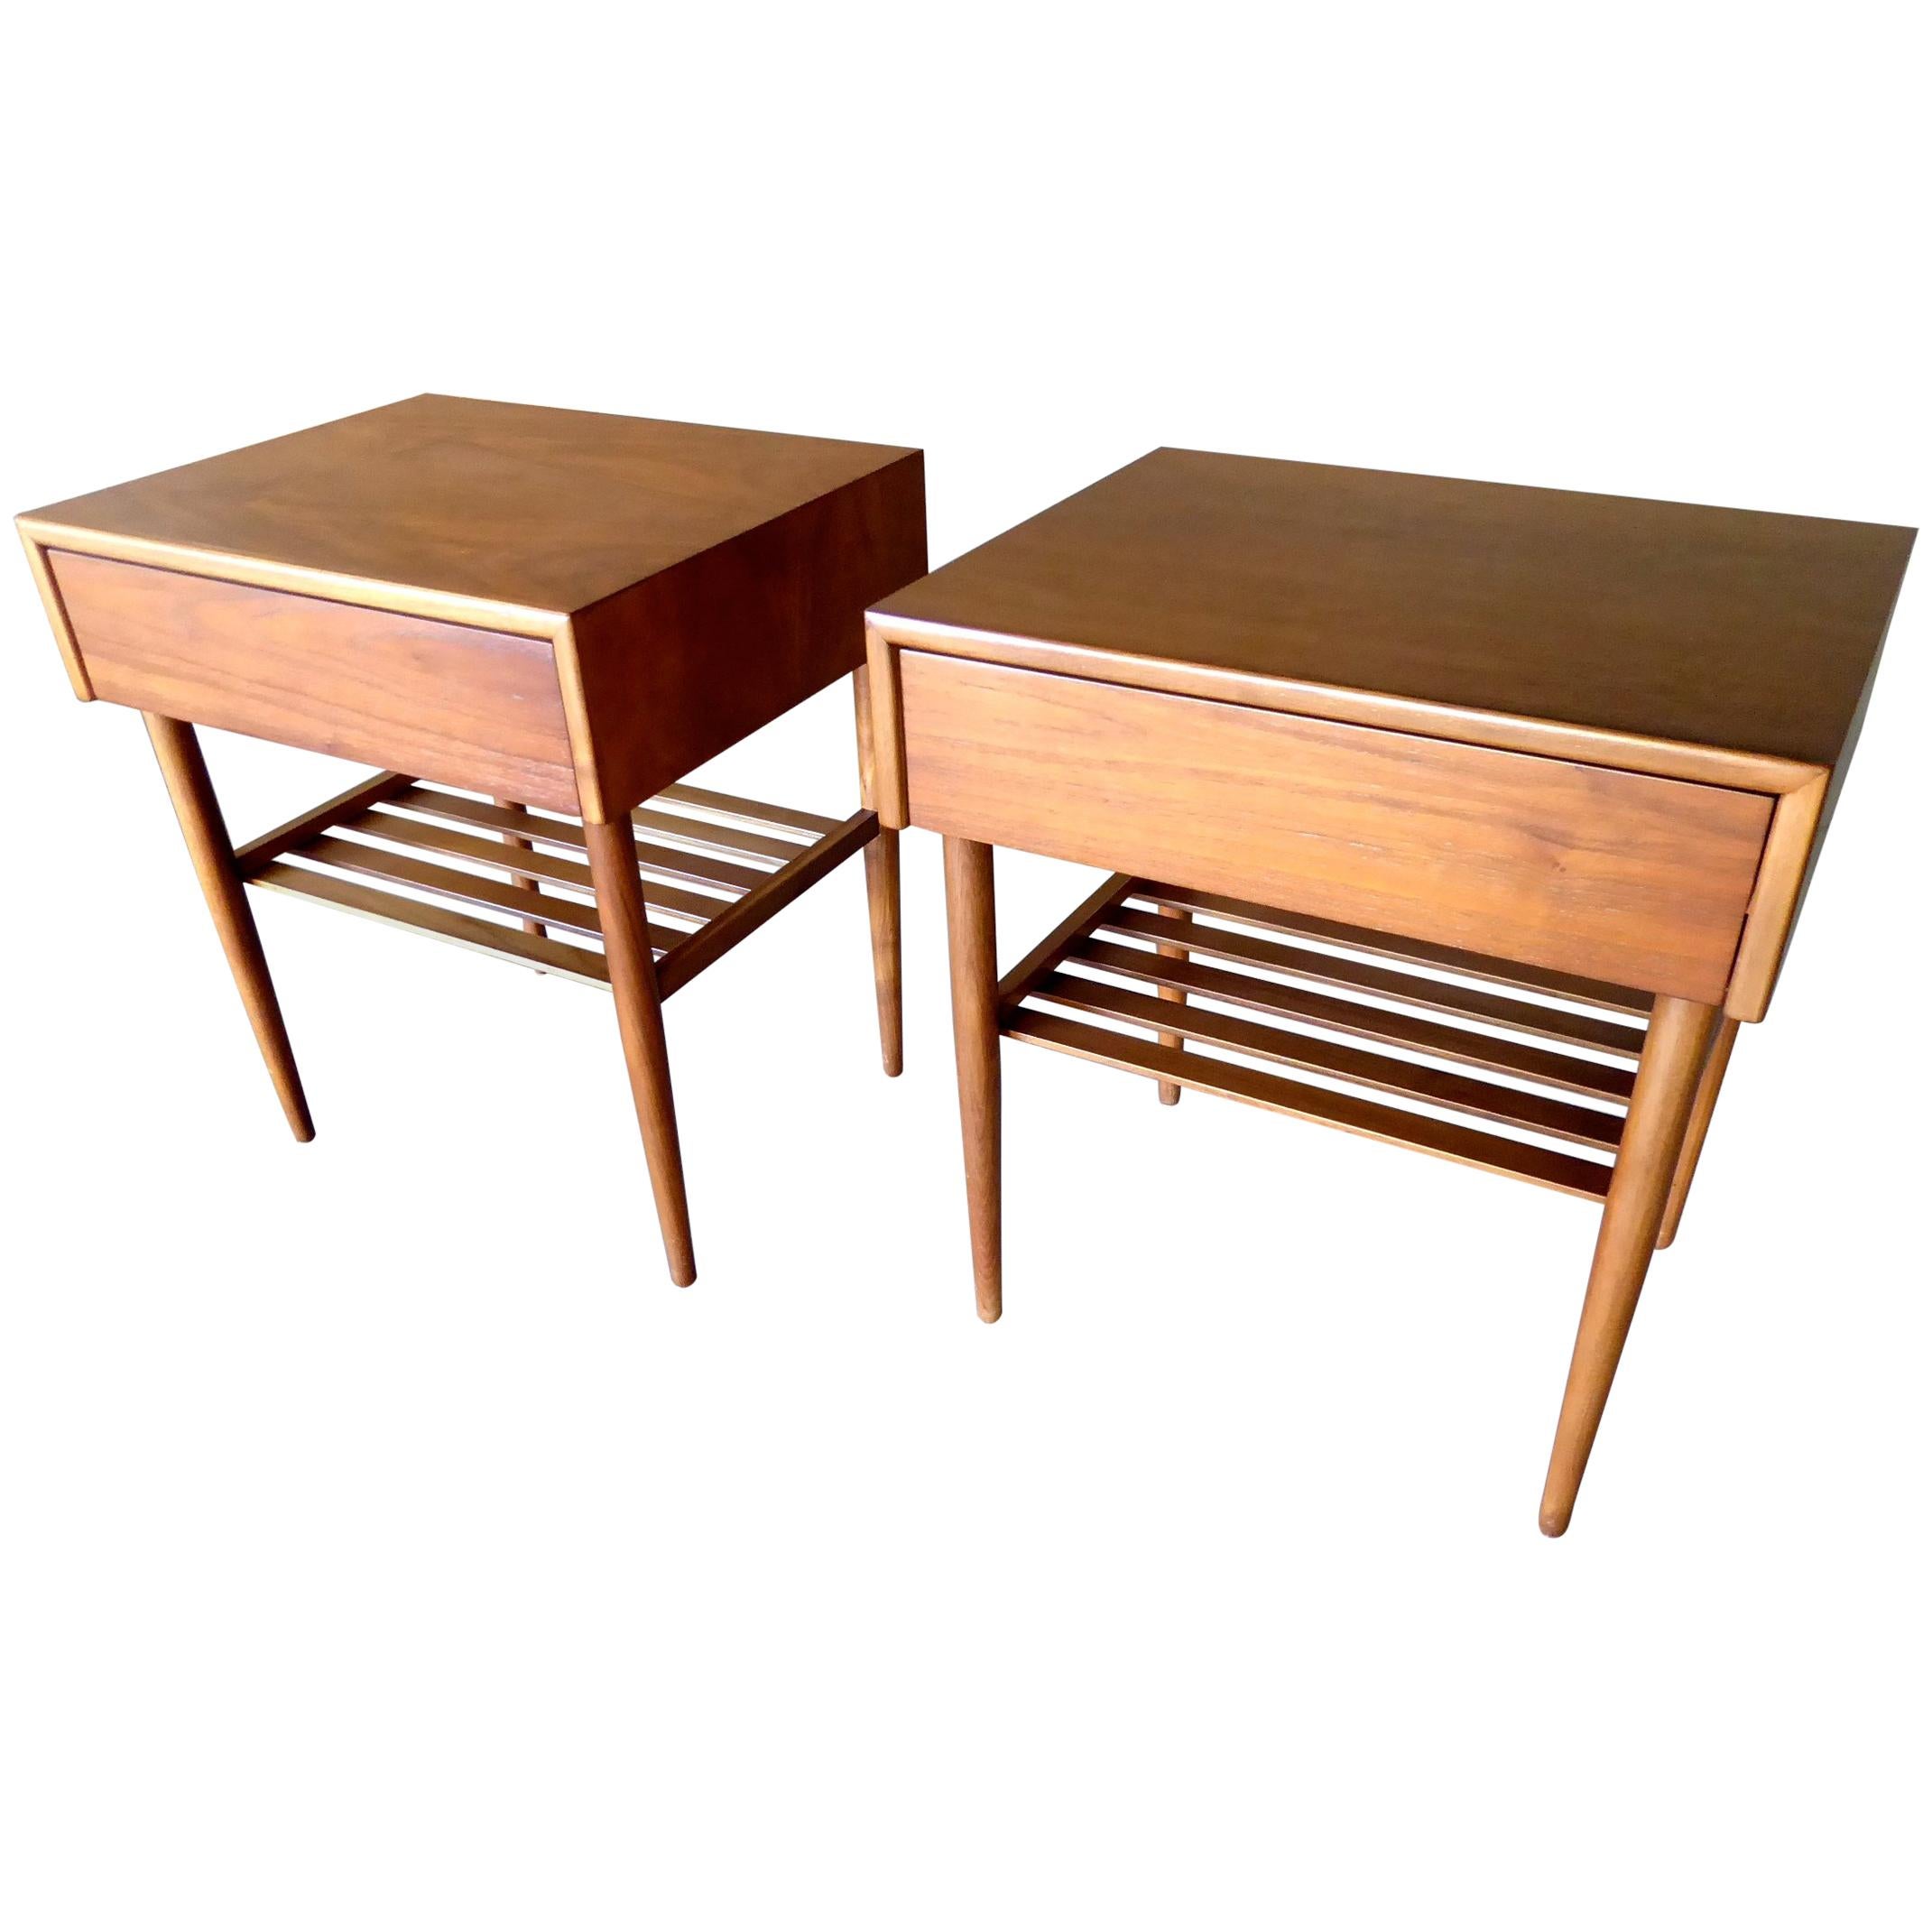 Pair of Walnut One Drawer Bedside Tables by Brown Saltman